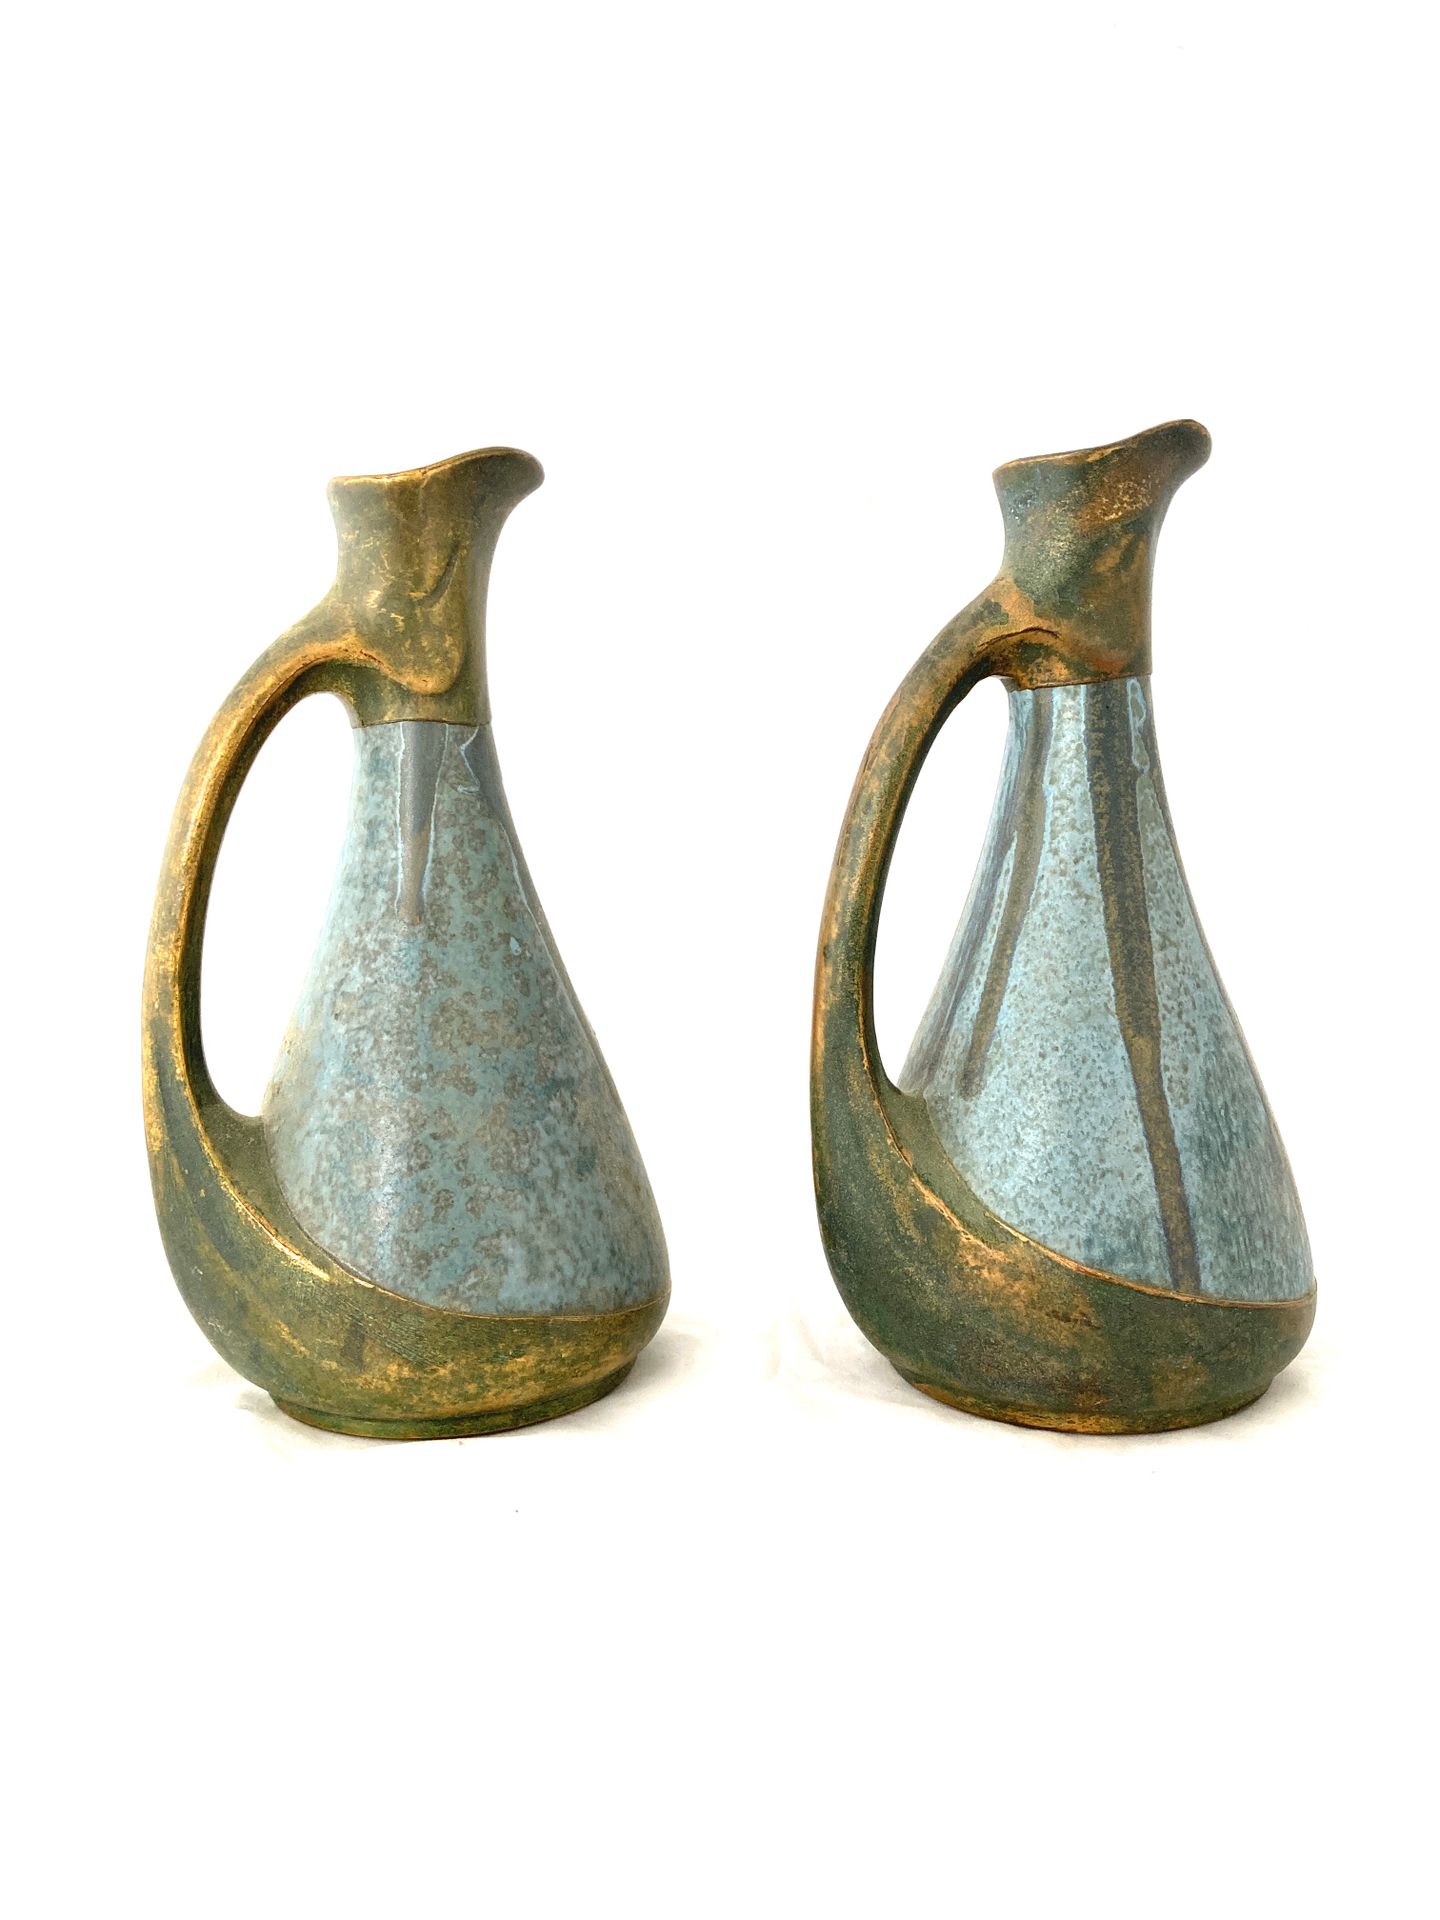 Null DENBAC (attributed to)

Pair of enamelled stoneware pitchers.

About 1900.
&hellip;